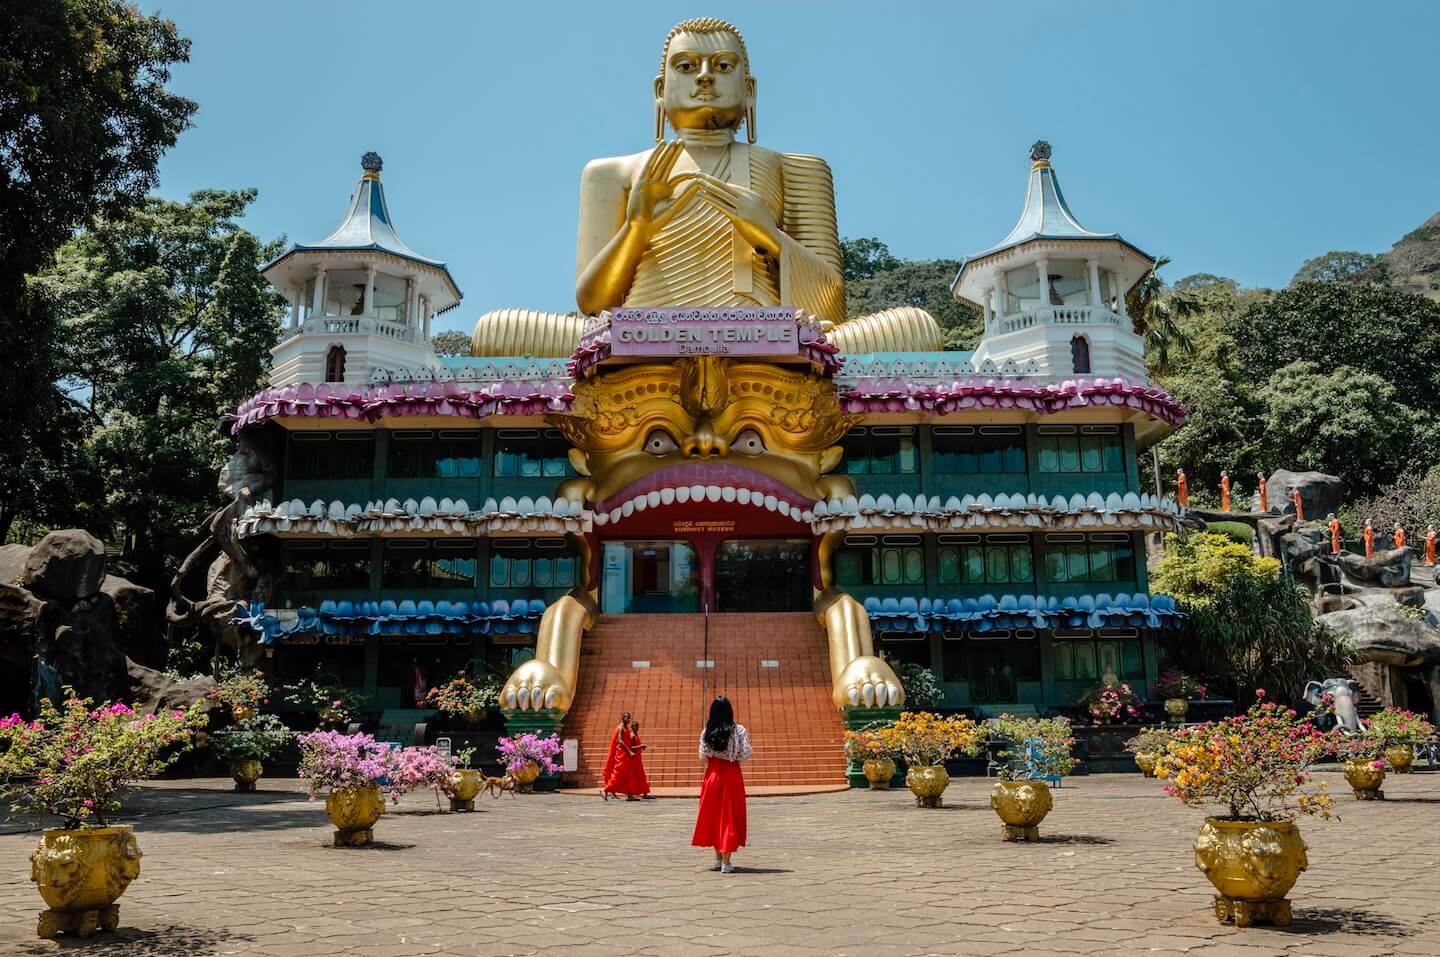 Stella weraning red dress standing in from of Golden Buddha temple